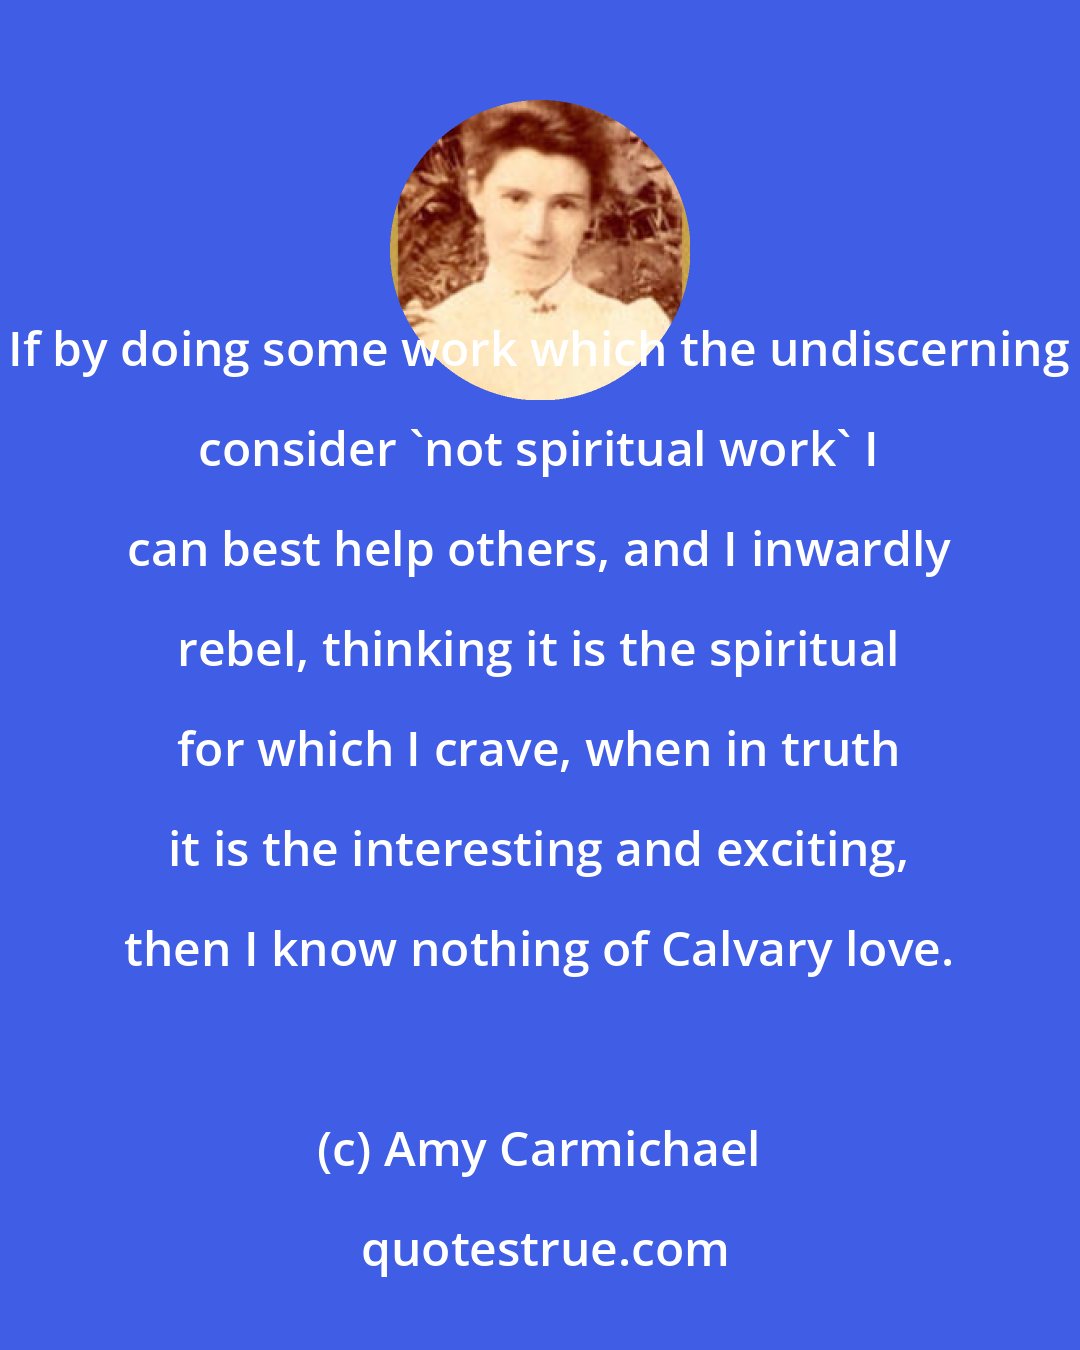 Amy Carmichael: If by doing some work which the undiscerning consider 'not spiritual work' I can best help others, and I inwardly rebel, thinking it is the spiritual for which I crave, when in truth it is the interesting and exciting, then I know nothing of Calvary love.